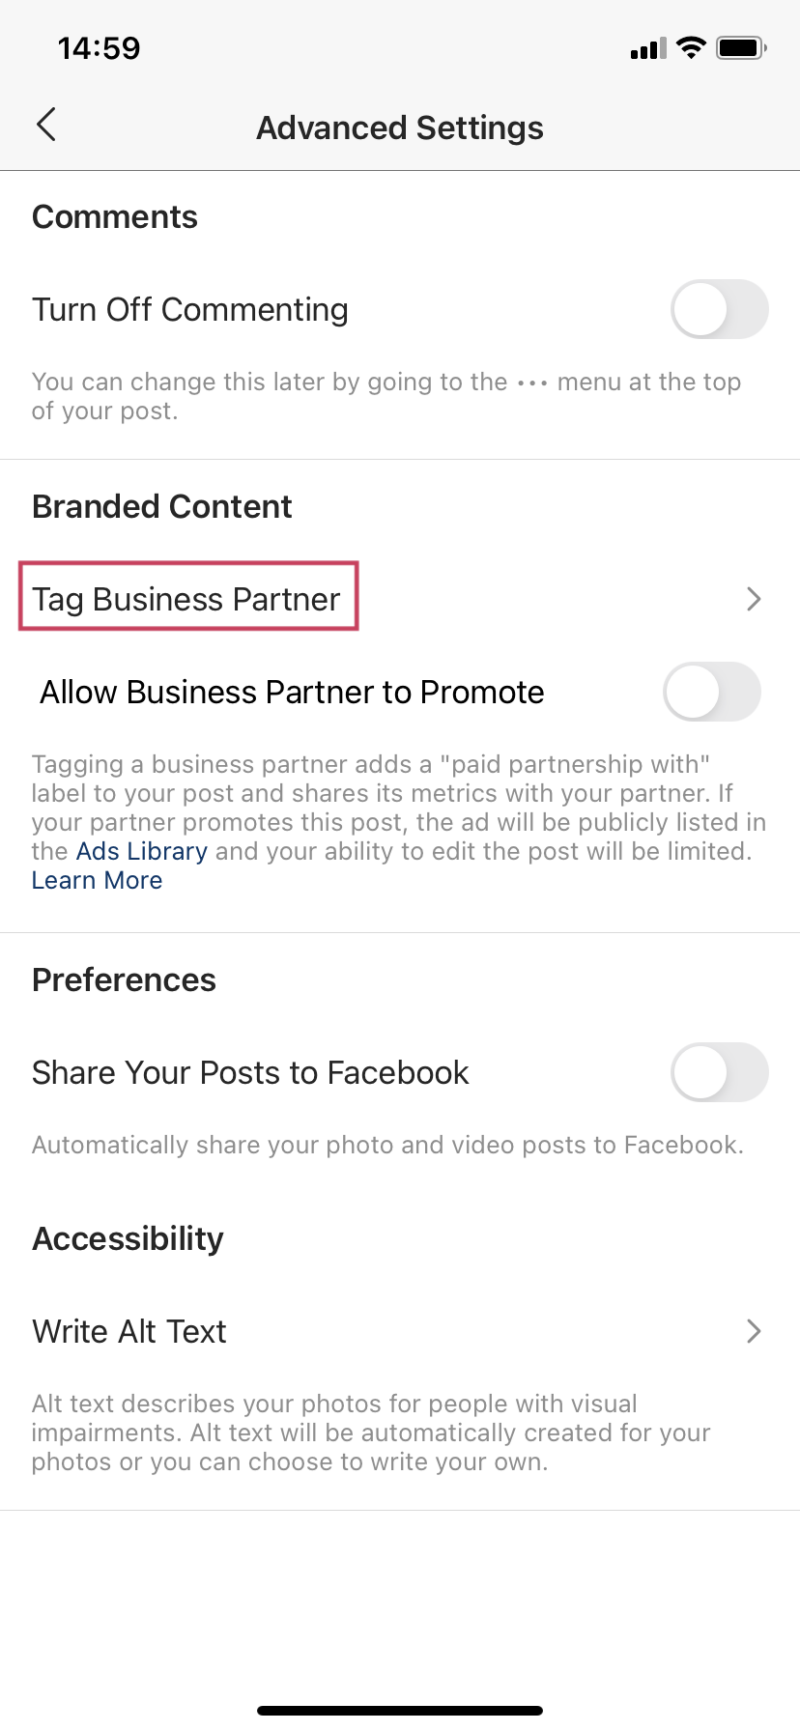 Go to Tag Business Partner